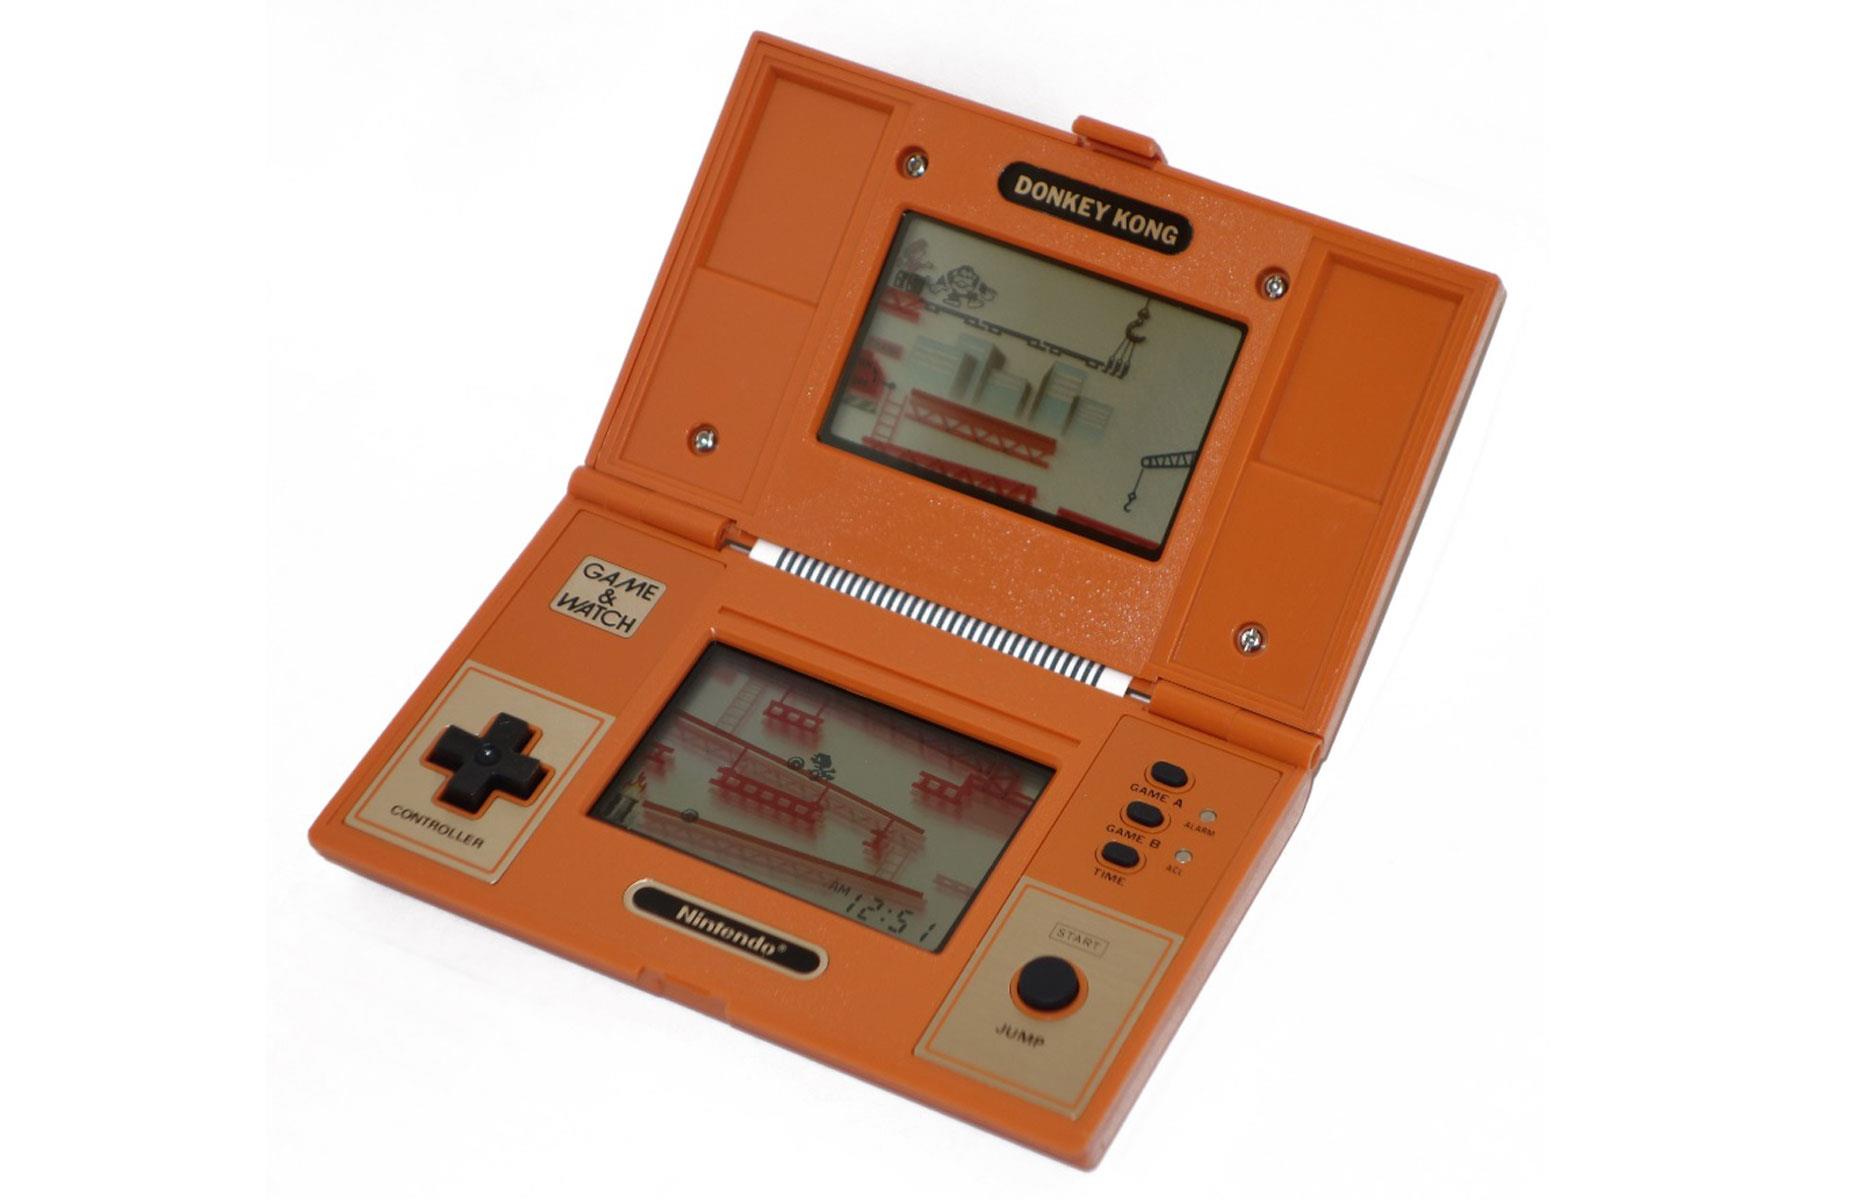 The Rarest Games Consoles (& How Much They're Worth)